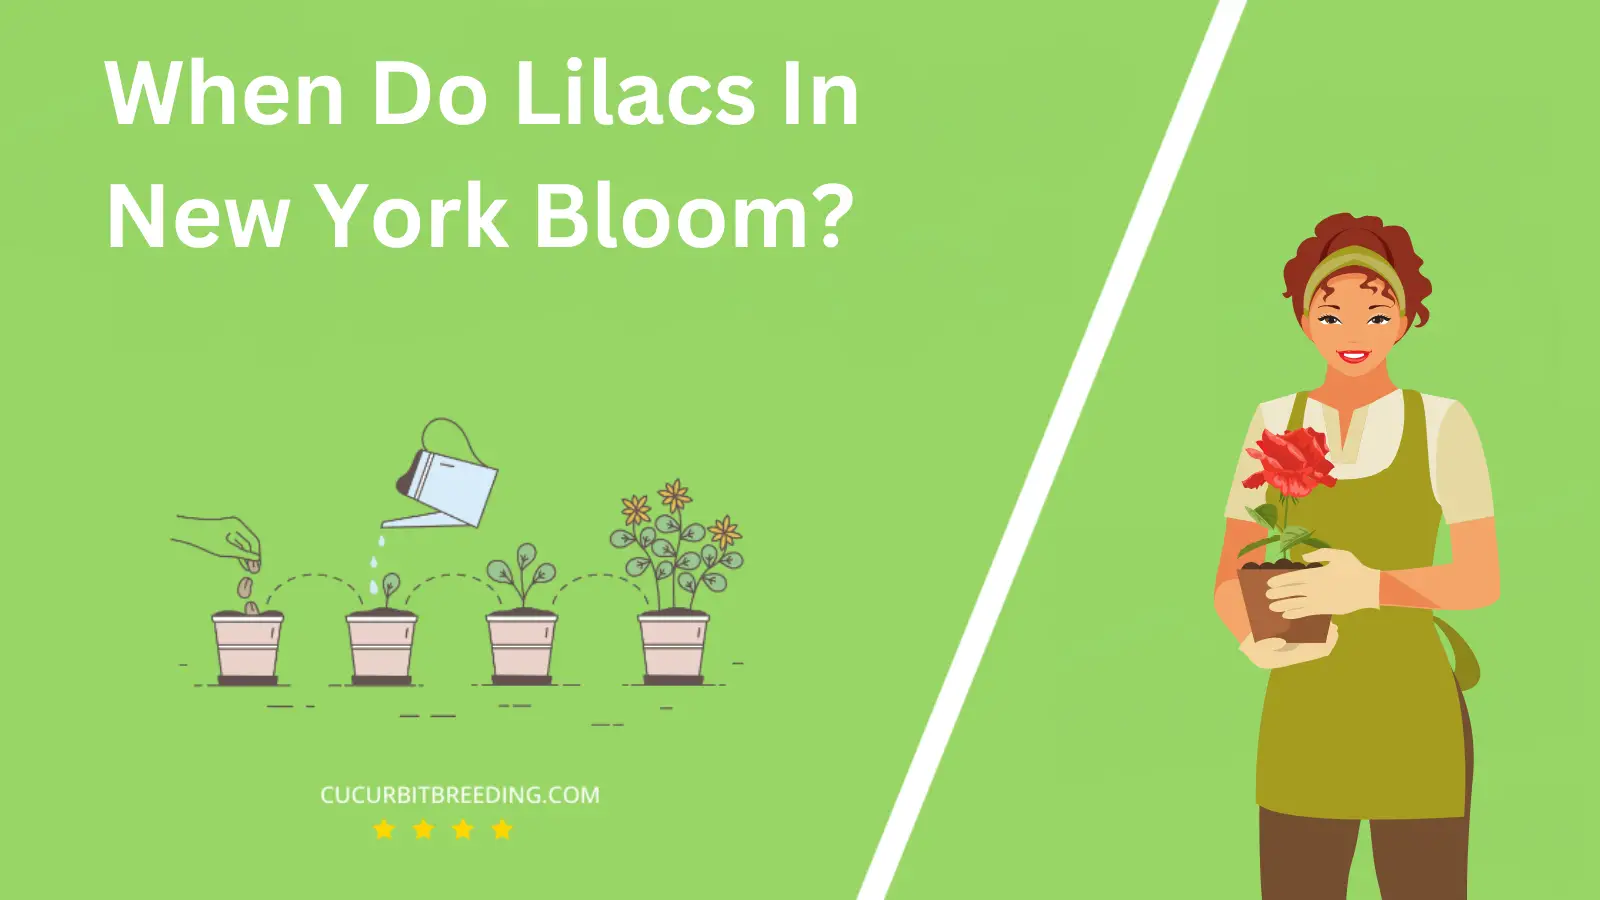 When Do Lilacs In New York Bloom?